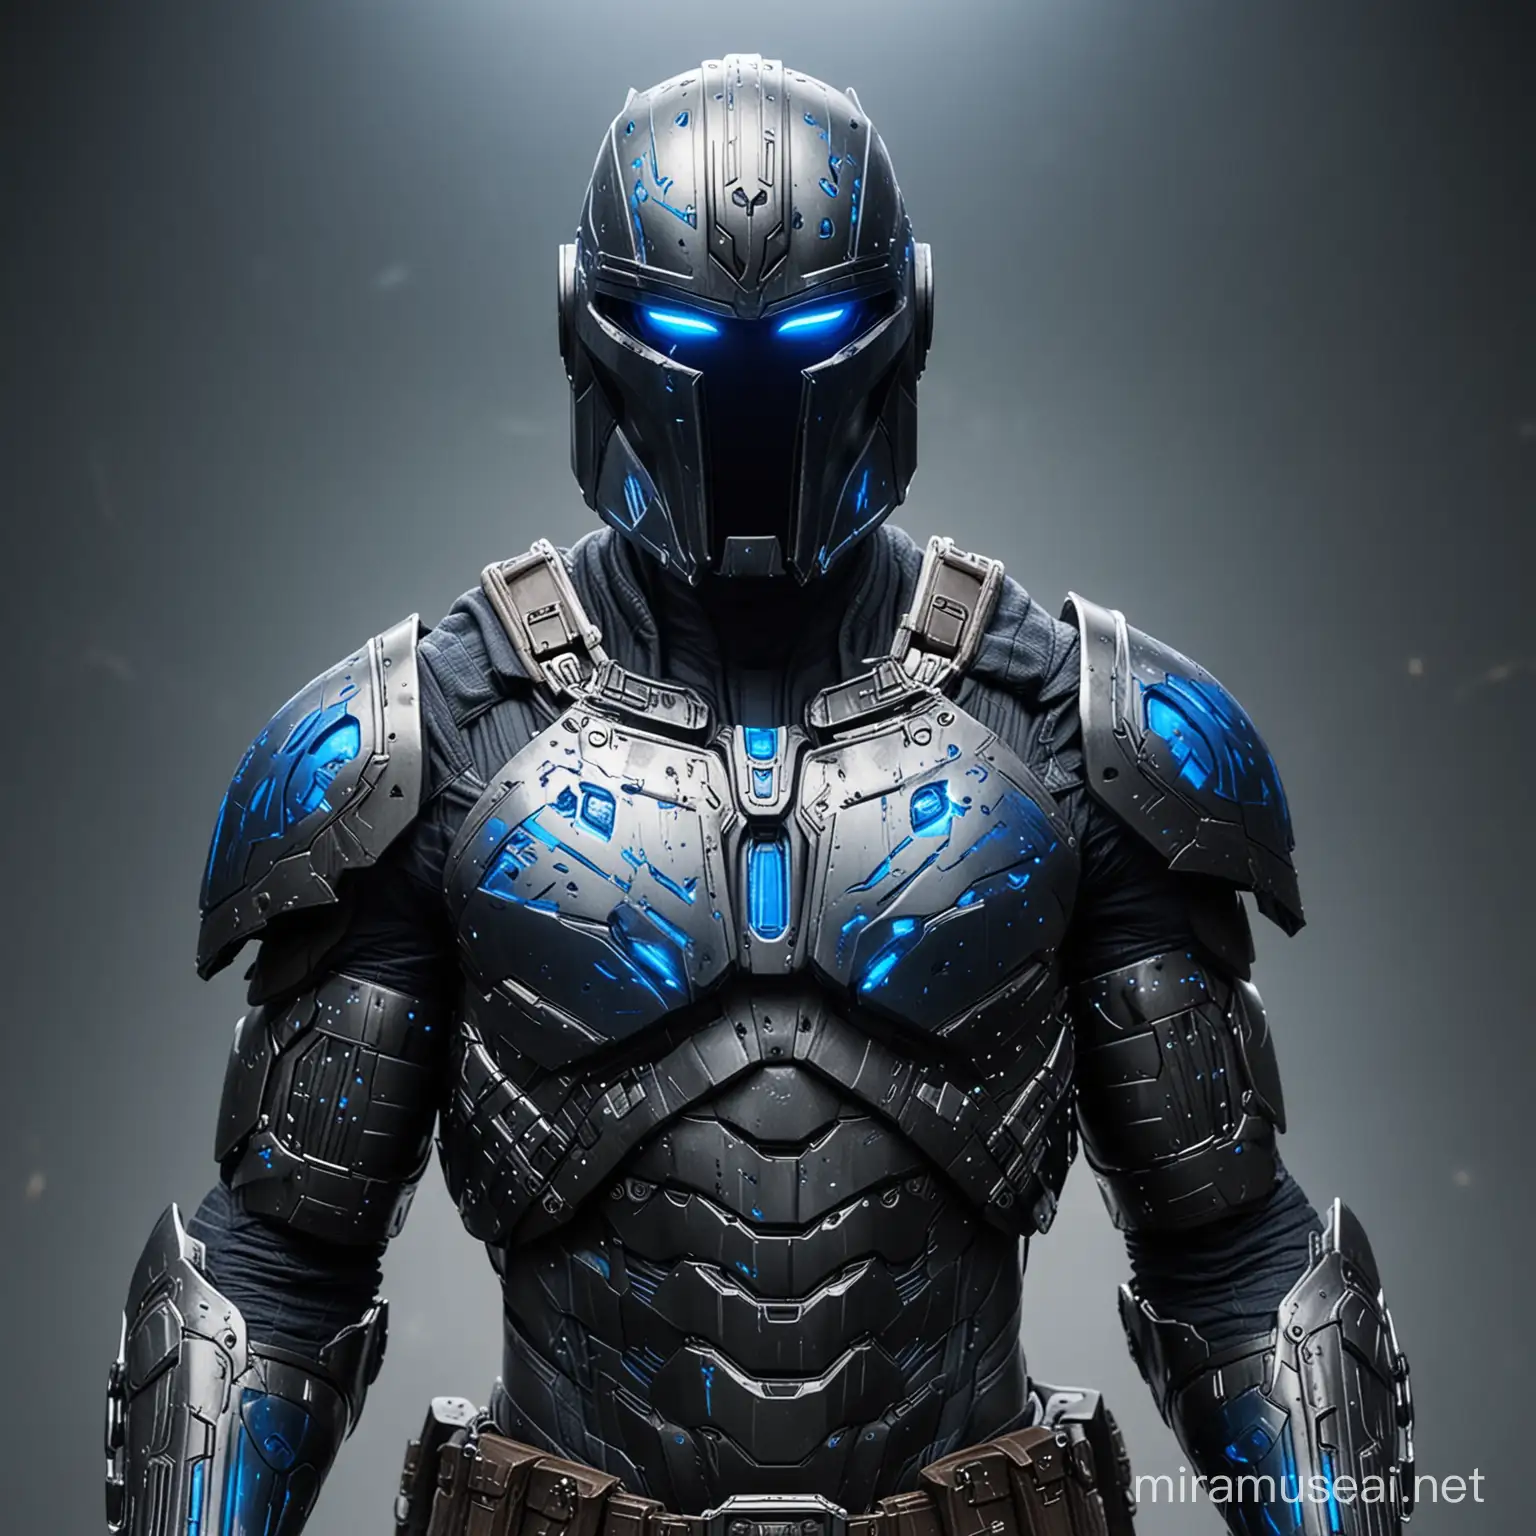 A dark silver knight, fully covered in steel armor with wakandan style markings, many blue lights outlining the armor, glowing blue mandalorian style eyes